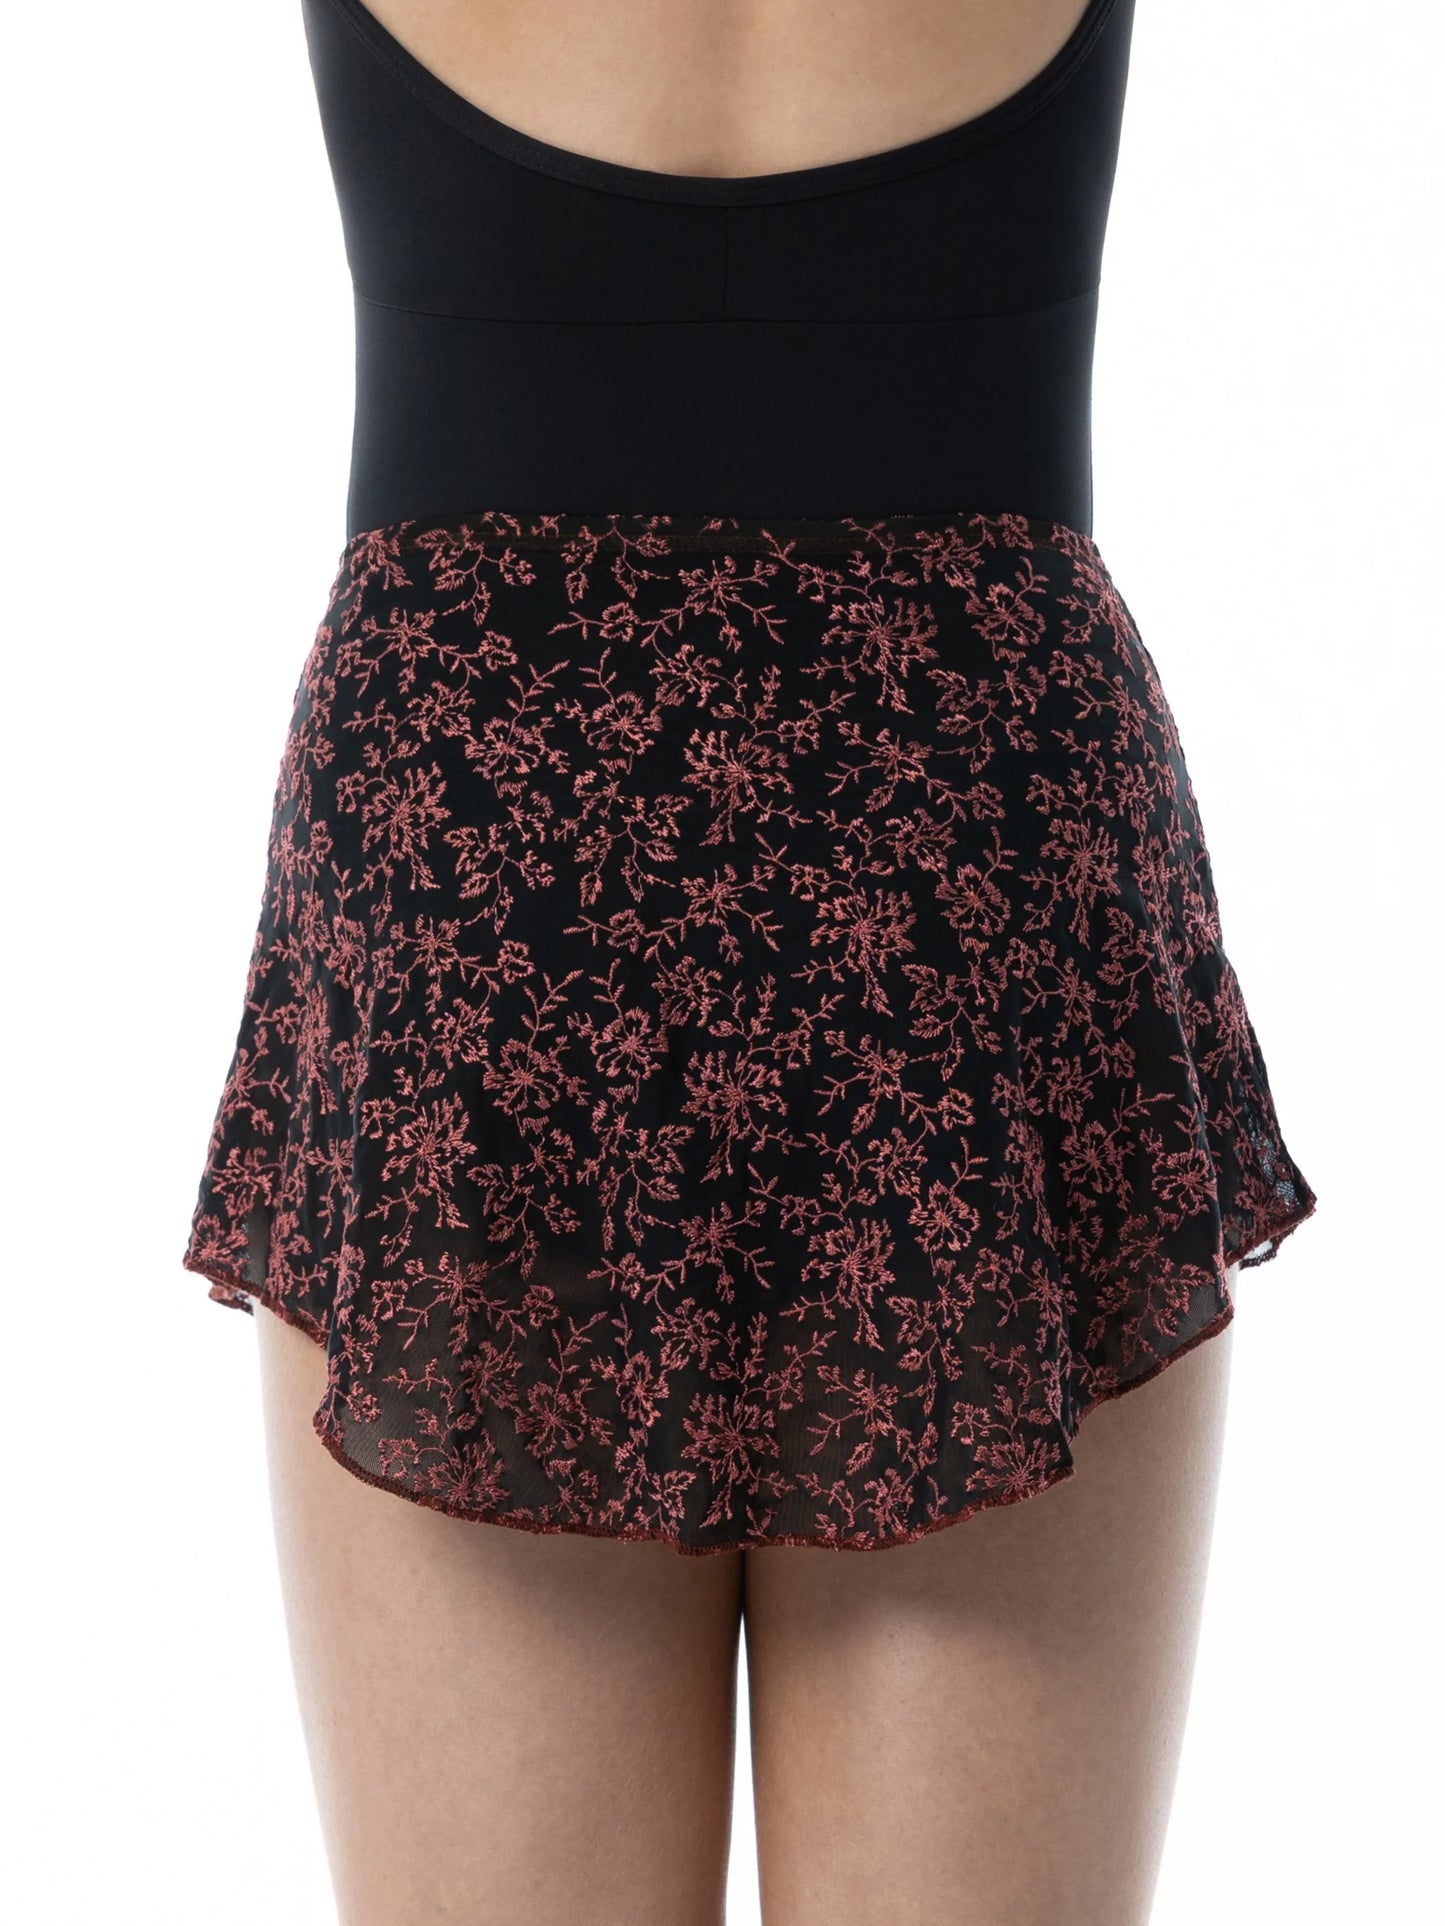 Darling Pull-on High Low Adult Skirt (1009A)